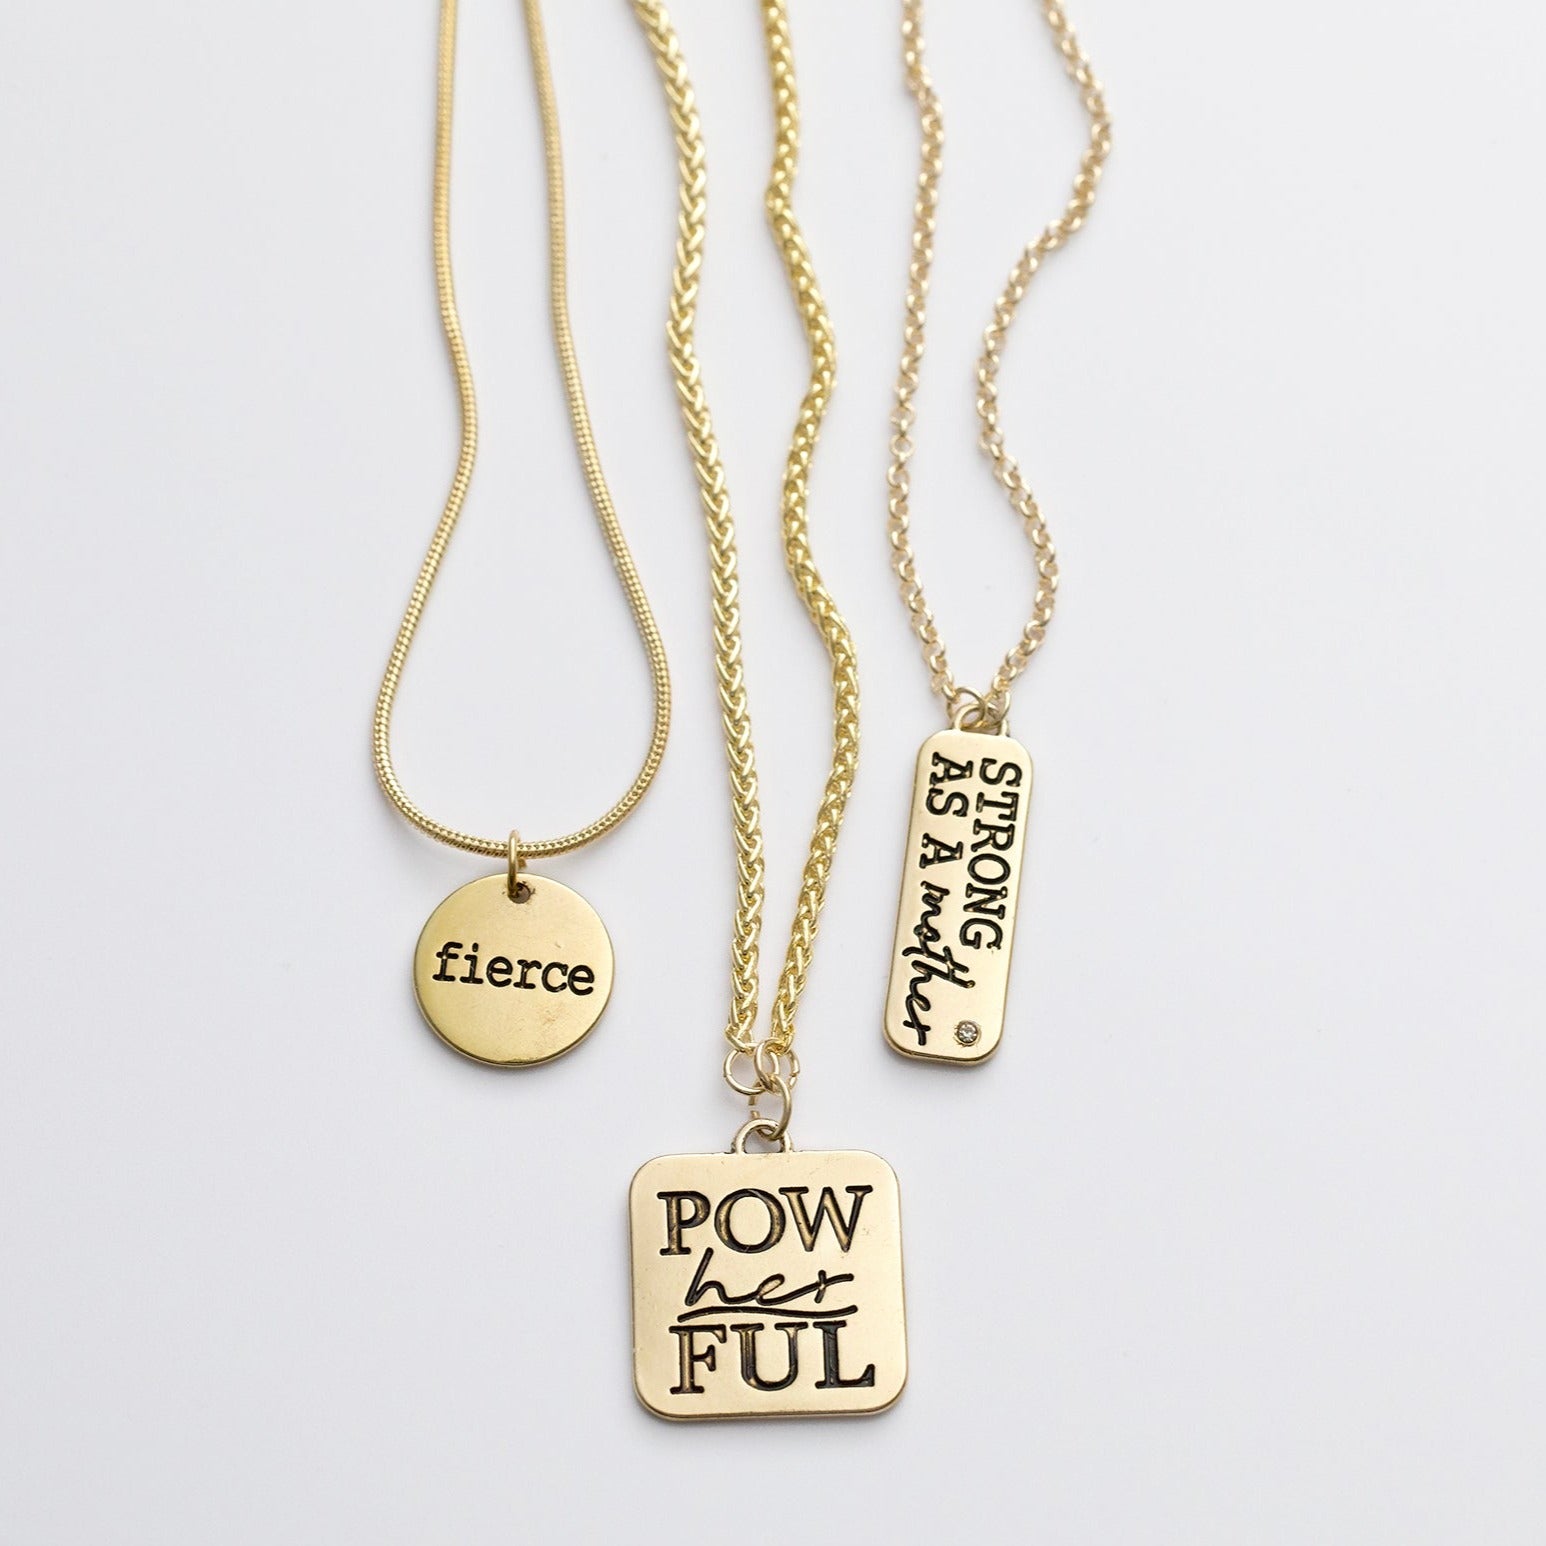 PowHERful 3 Piece Charm Set in Gold - "Strong As A Mother" "PowHERful" "Fierce" - GB Exclusive - Goody Beads